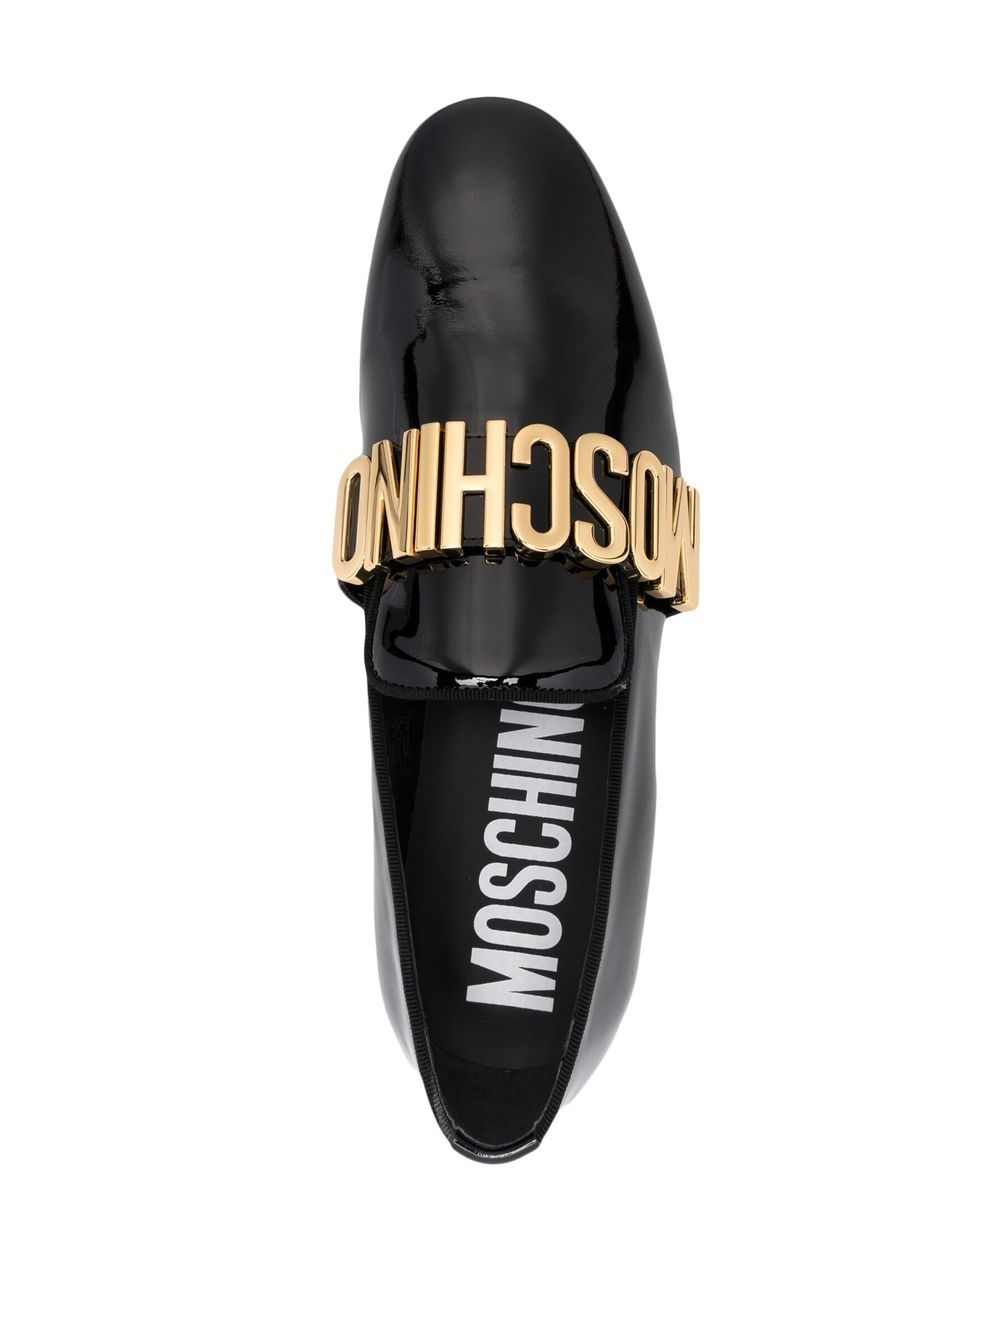 Moschino Maxi Logo Lettering Loafers - Farfetch